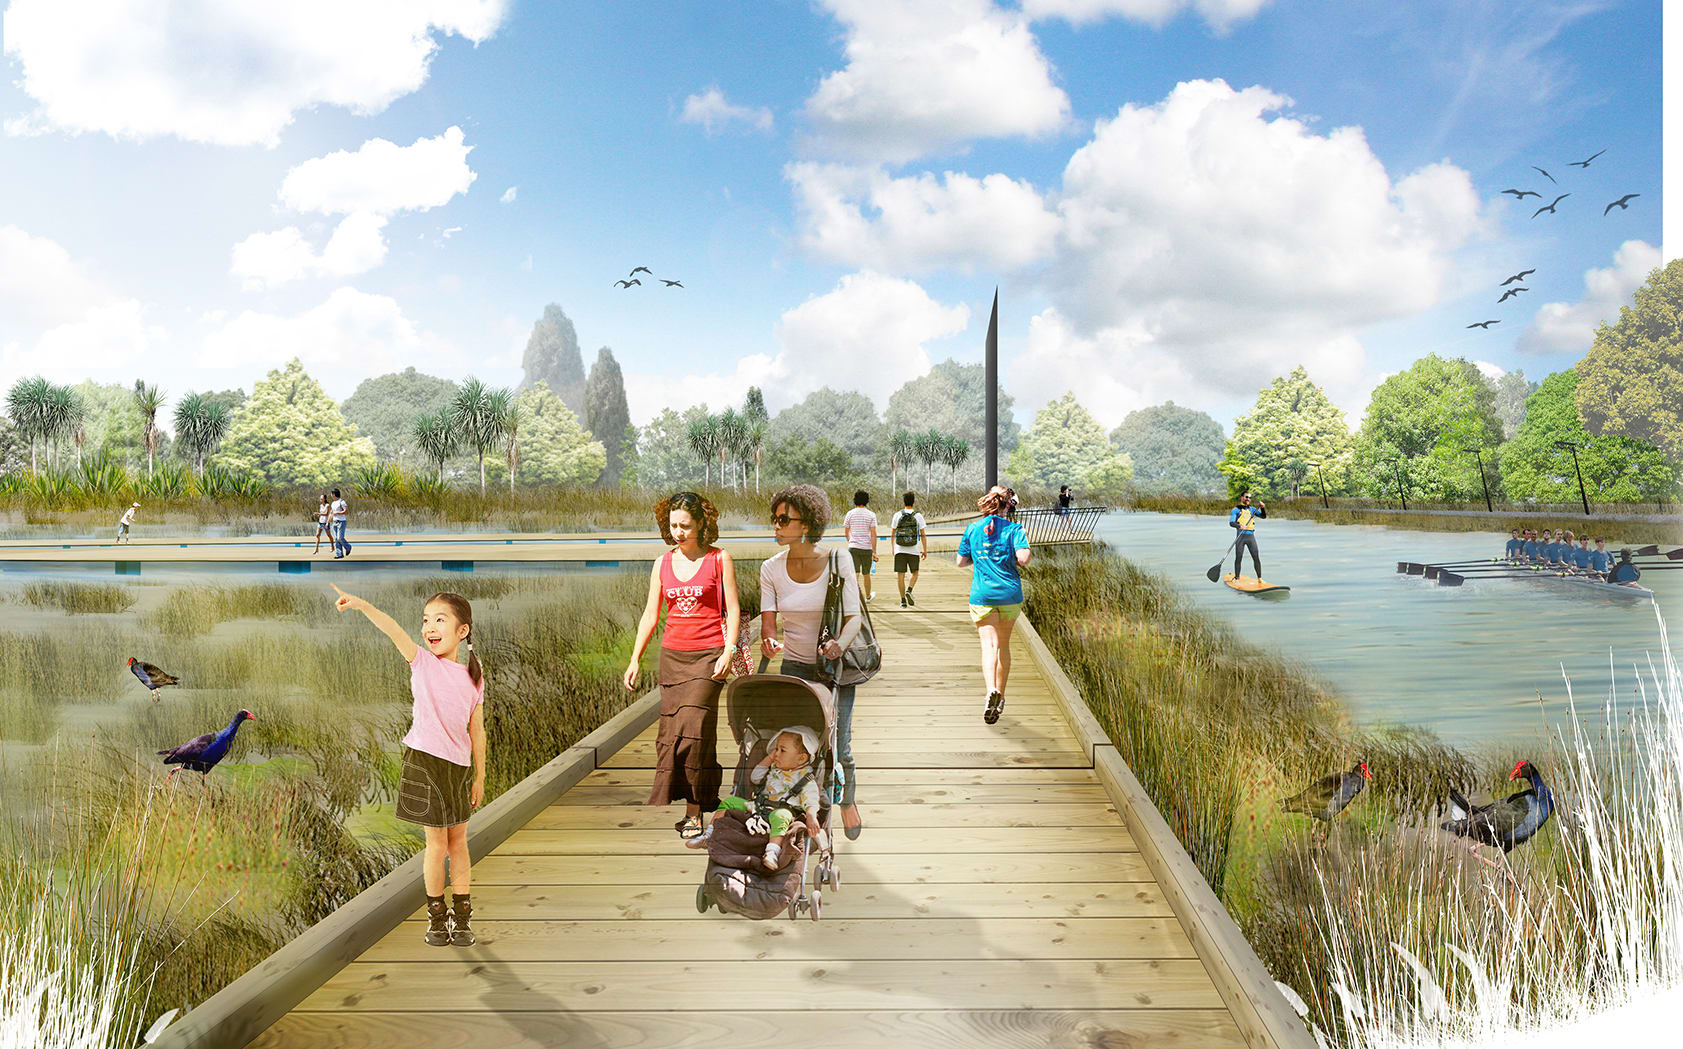 Artist's impressions of the Christchurch river red zone Avon River, from Regenerate Christchurch.